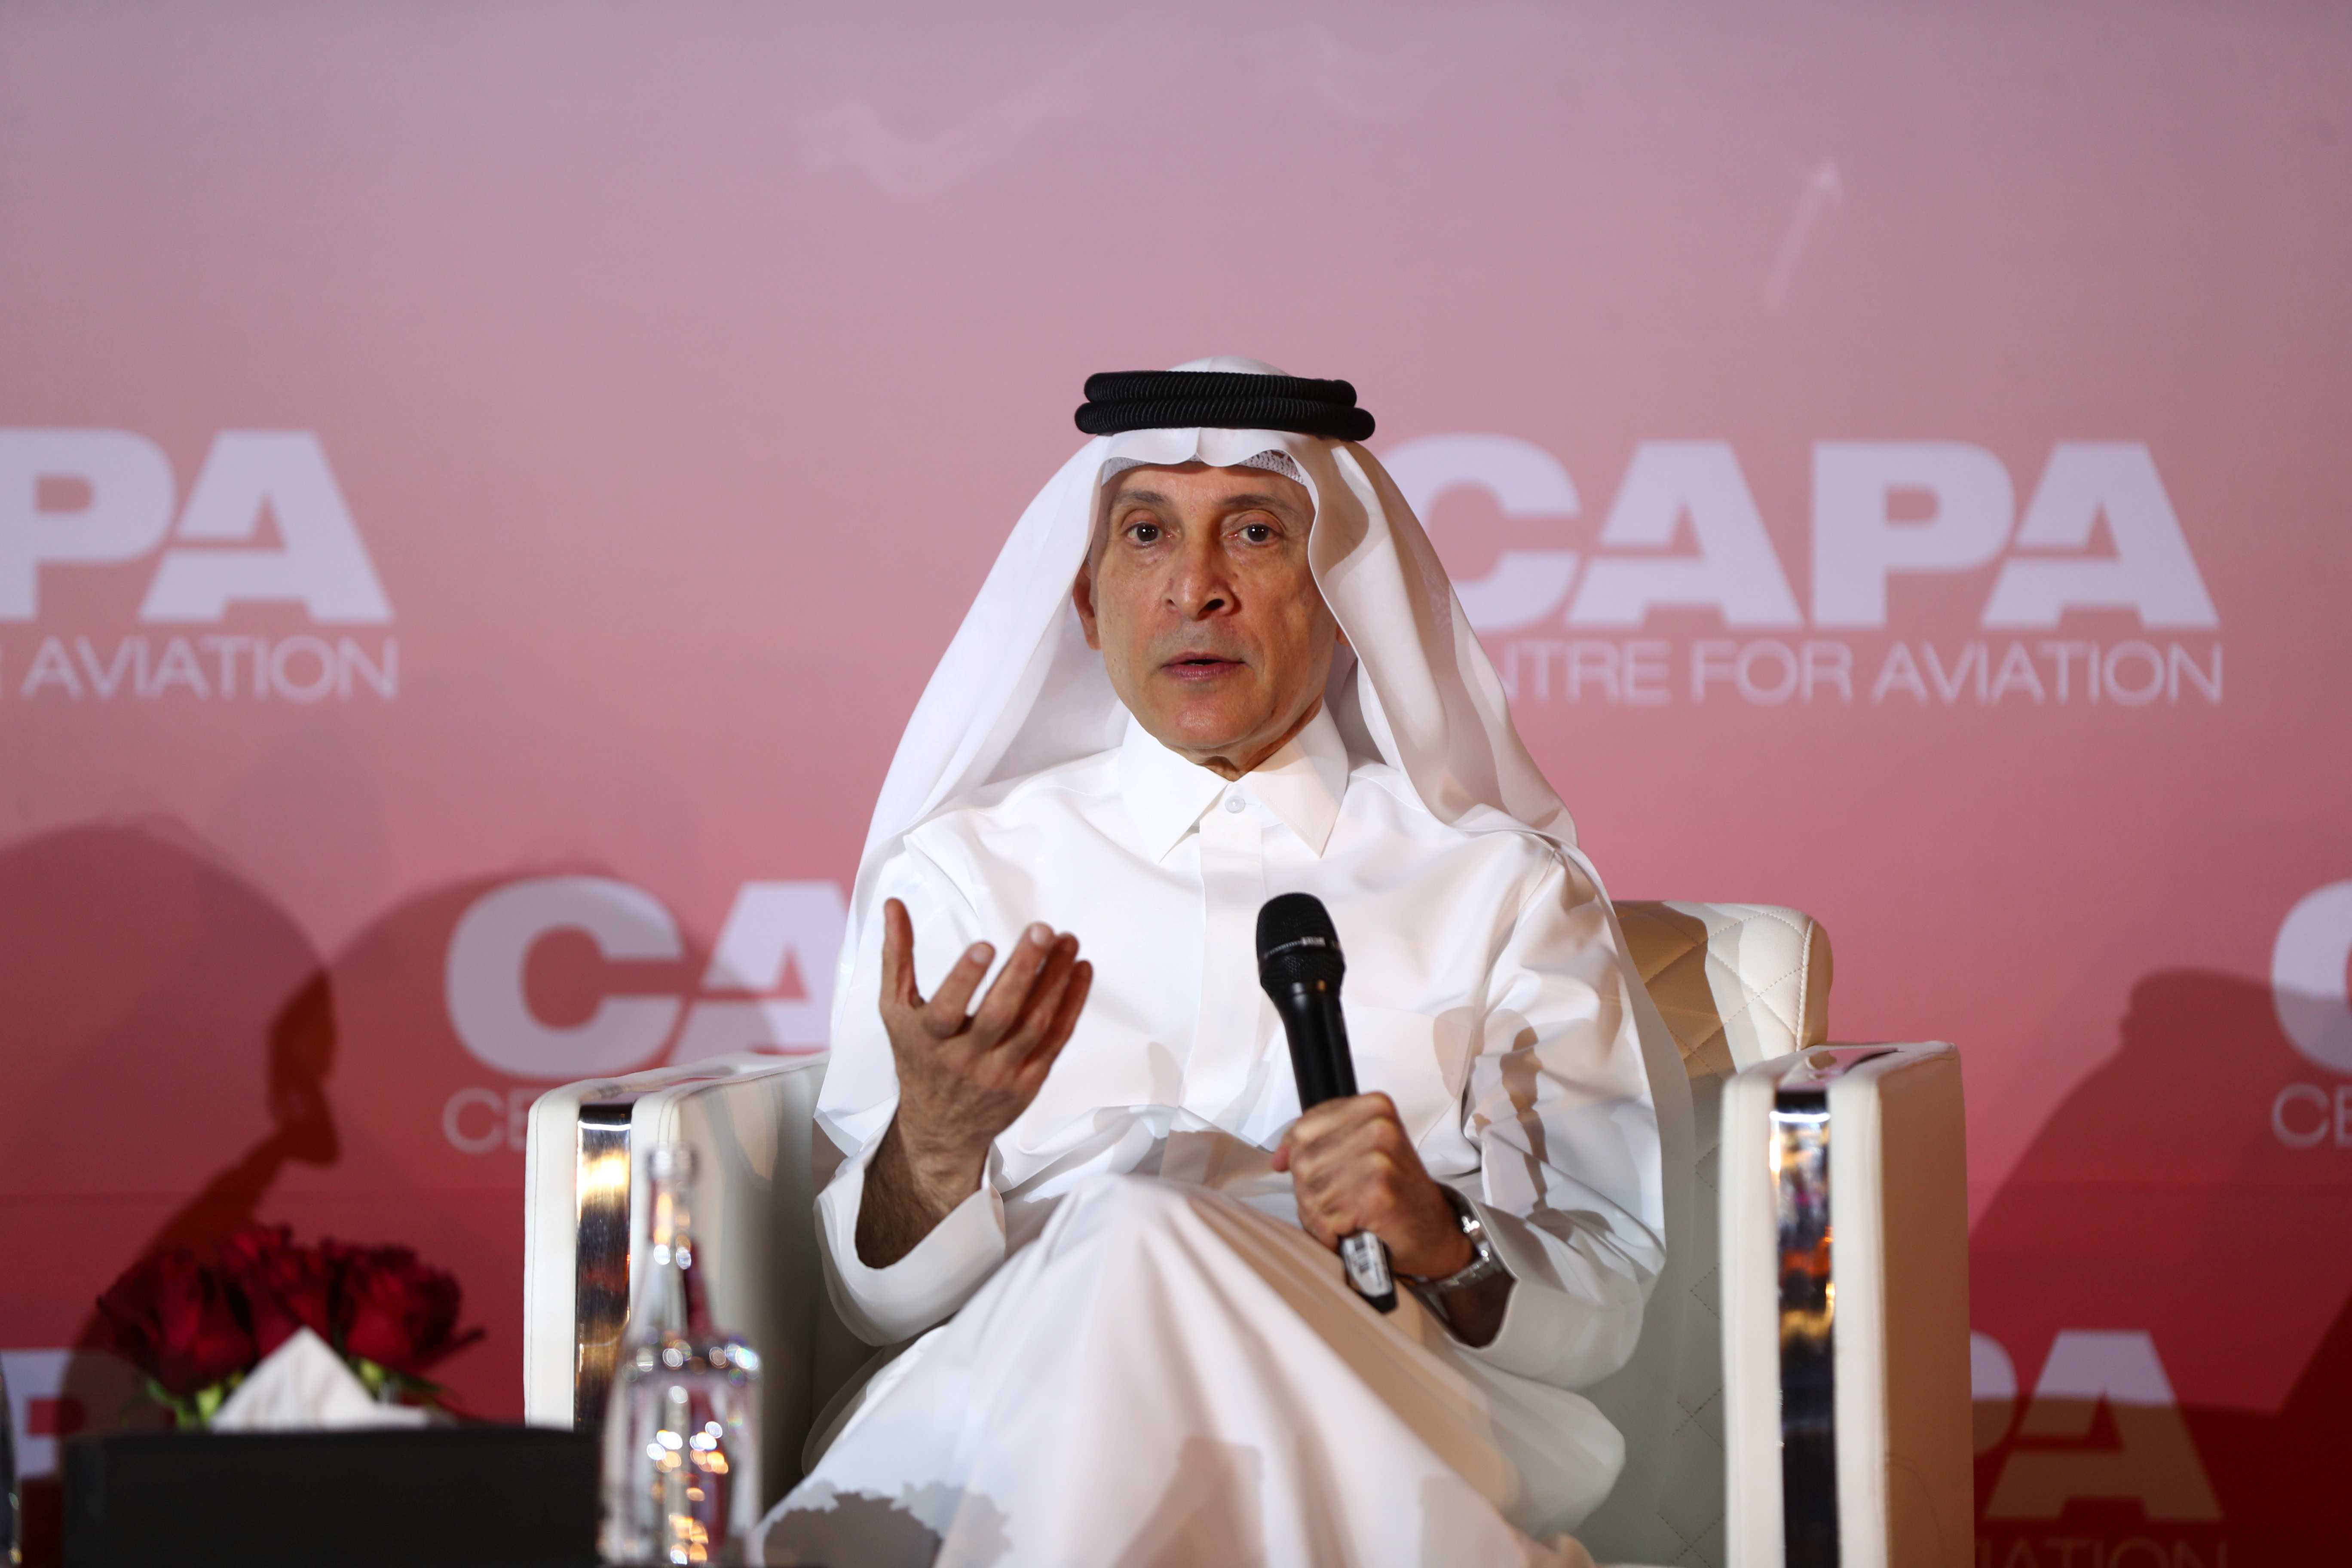 Qatar Airway's Chief Executive Officer, Akbar Al Baker speaks at the opening session of a CAPA aviation summit, in Doha